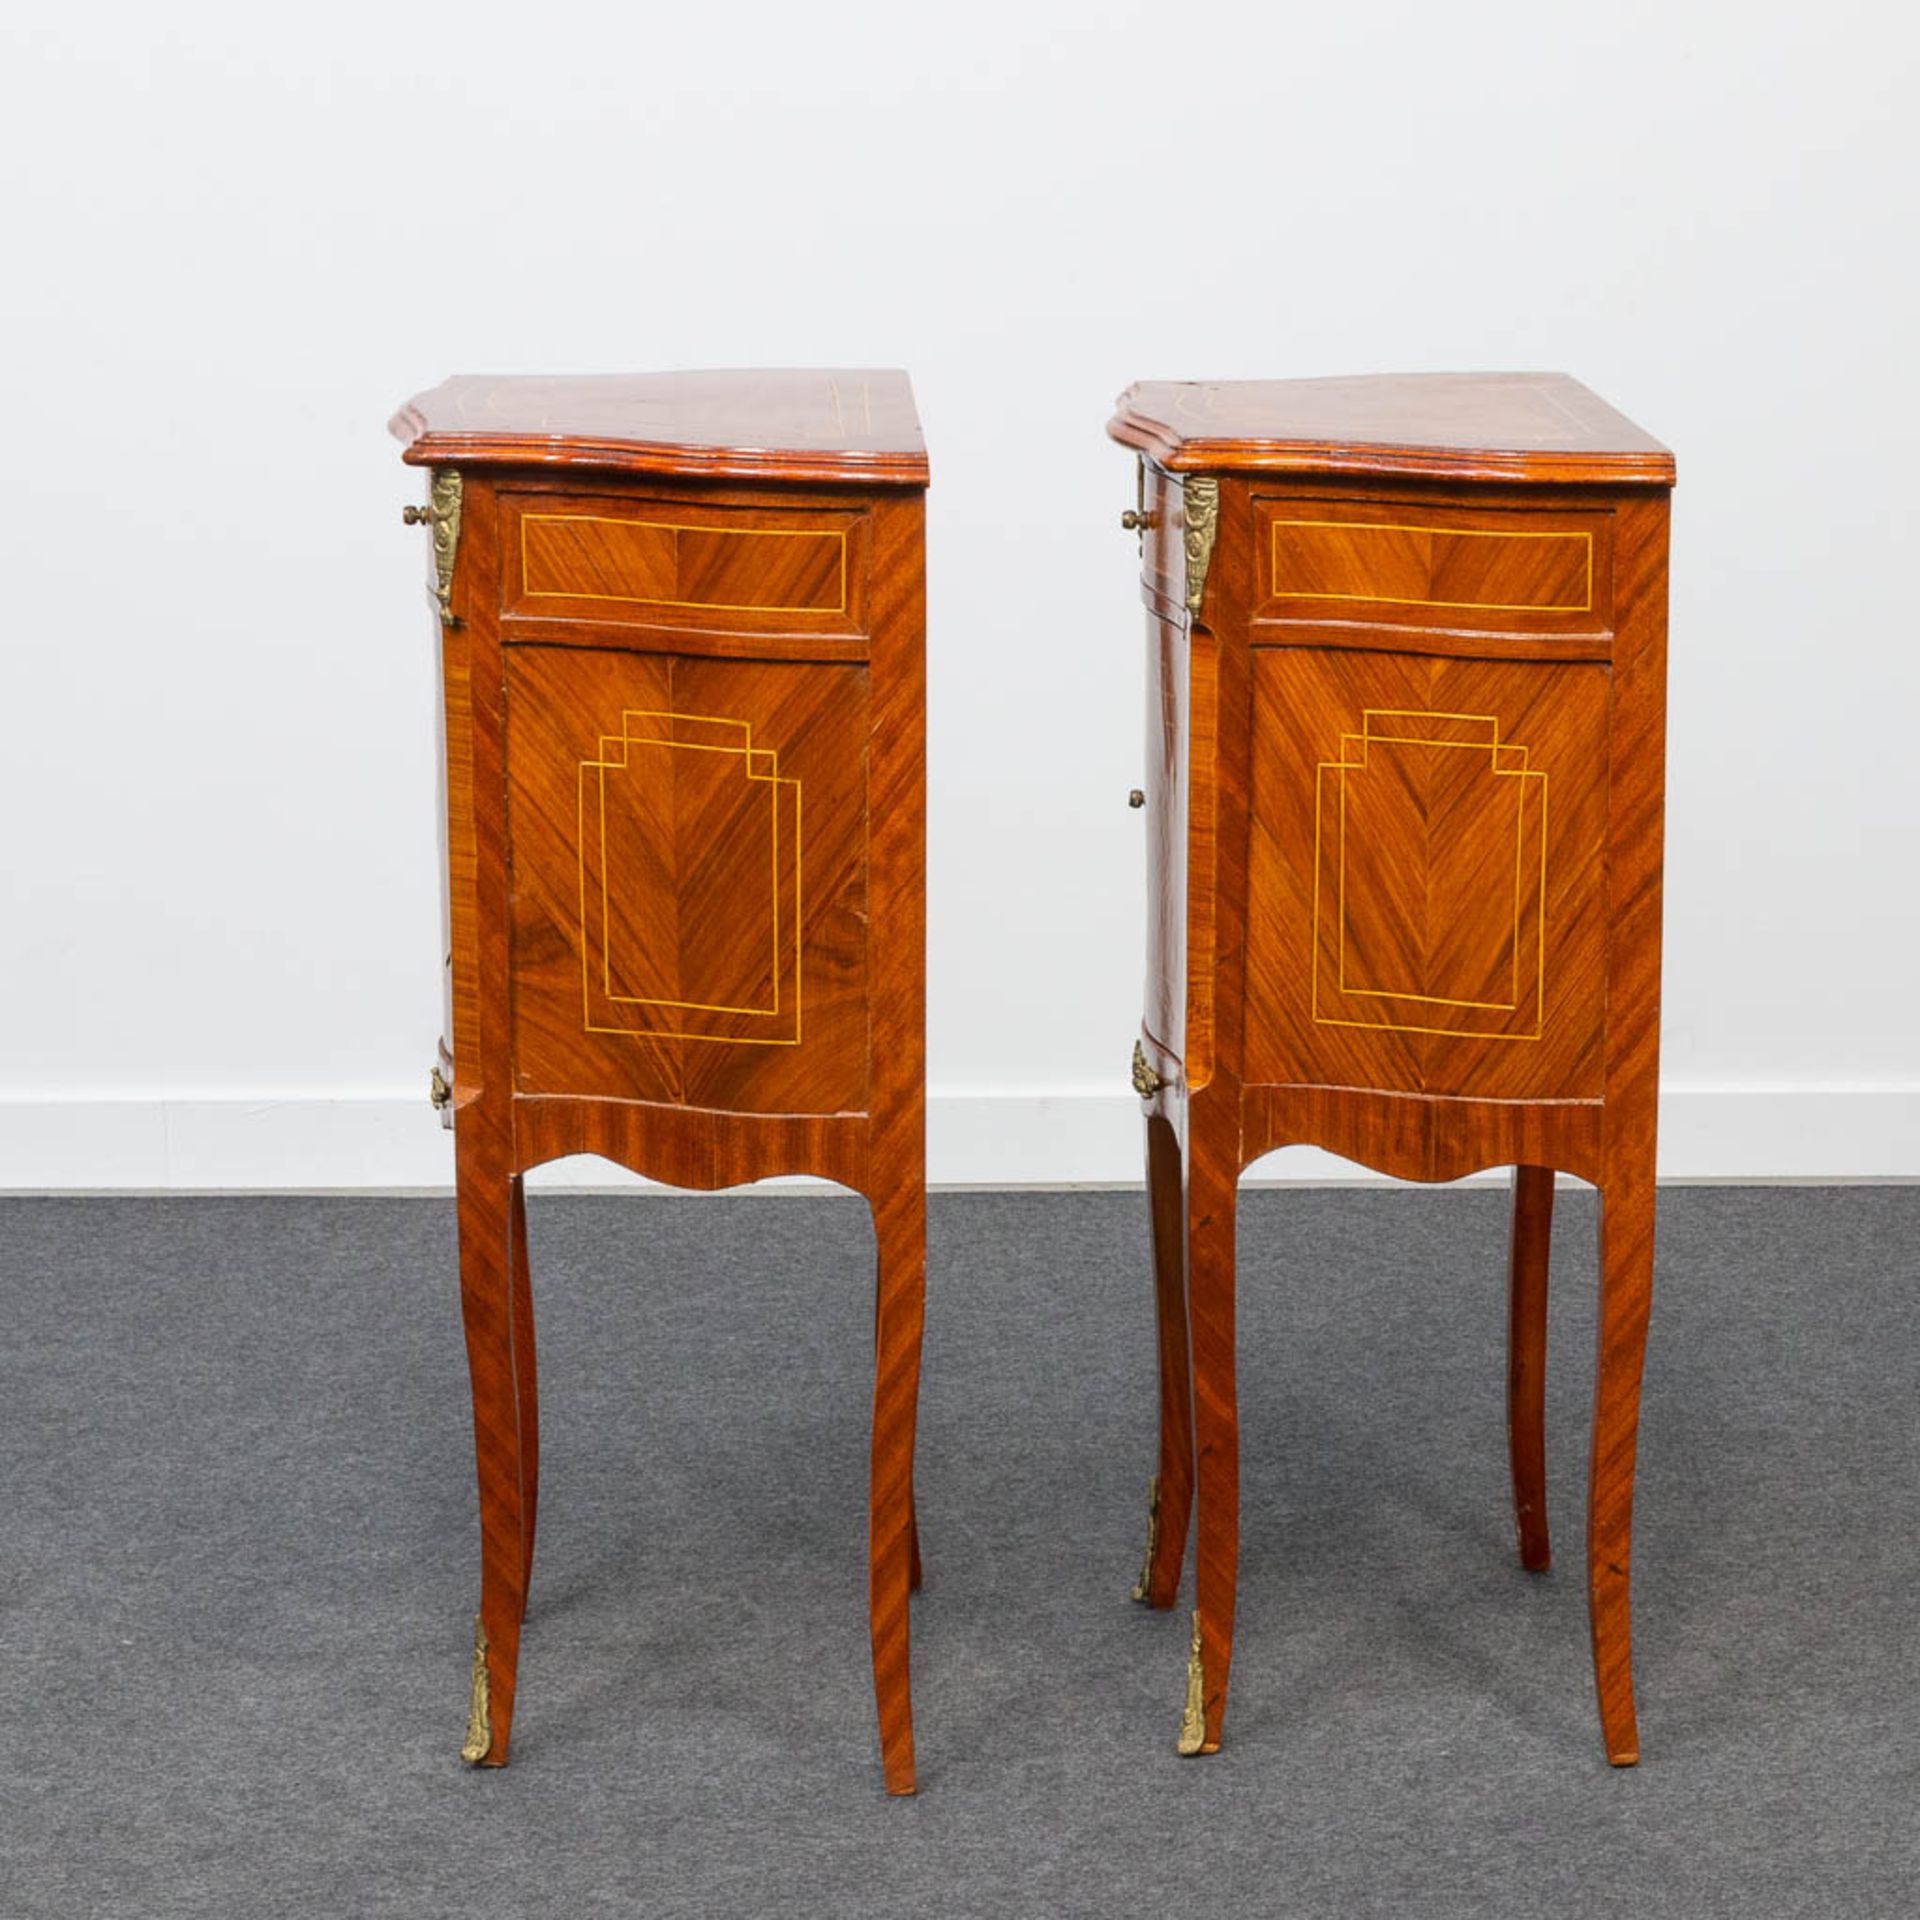 A pair of bronze mounted nightstands, inlaid with marquetry. Second half of the 20th century. - Image 11 of 22